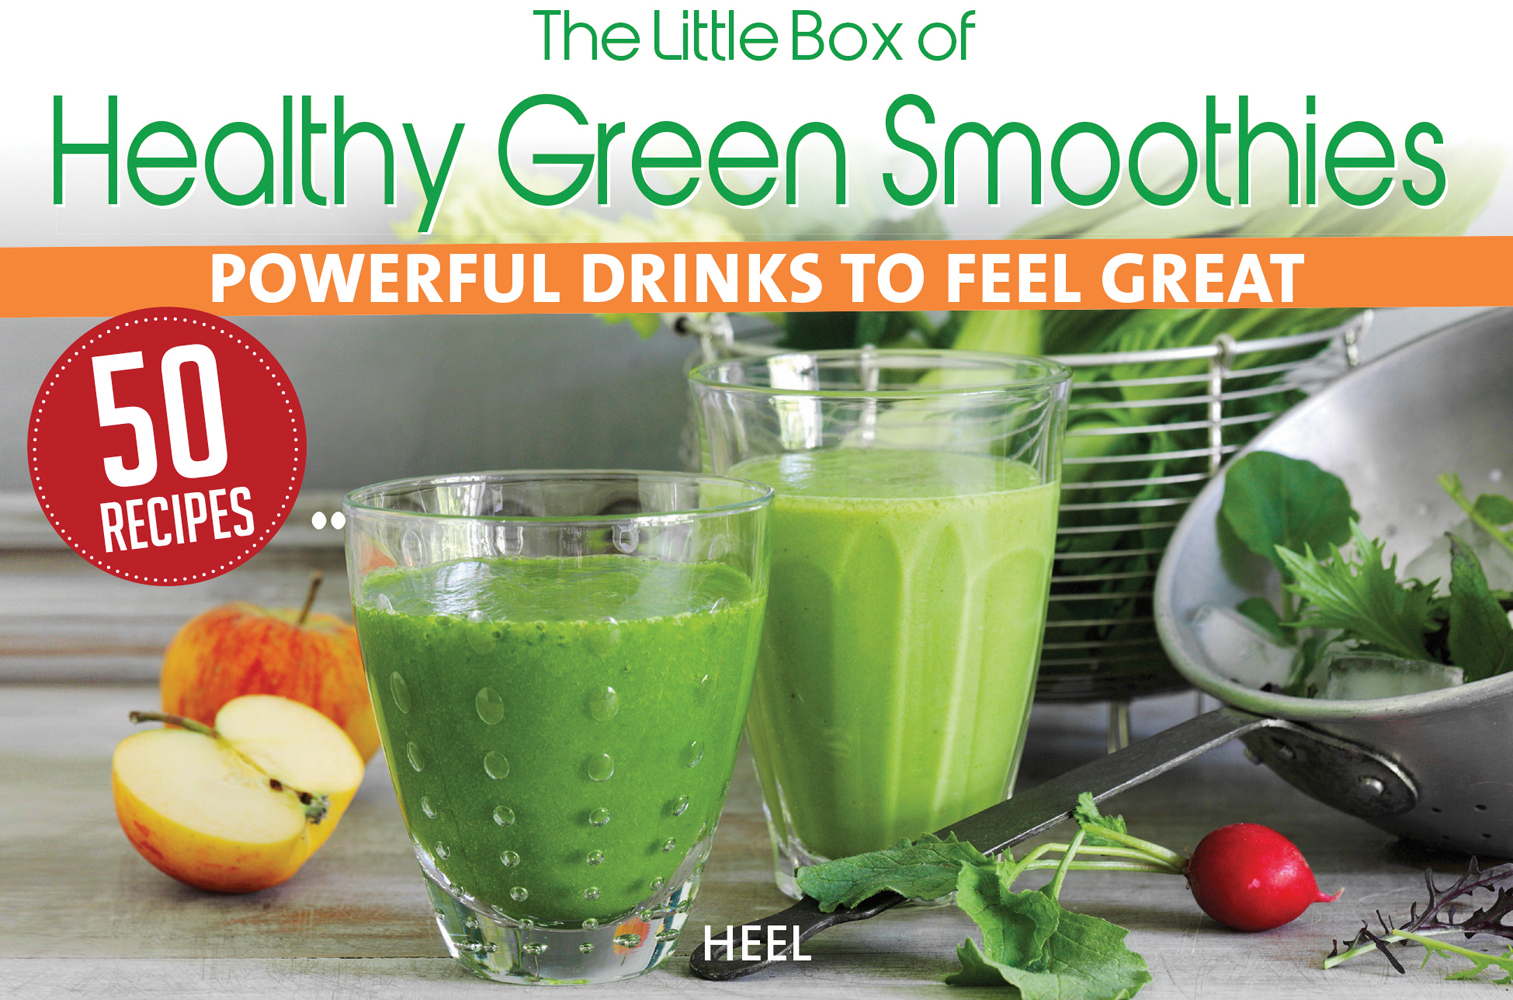 Metal box, 2 glasses of green liquid smoothies, apple halved, The Little Box of Healthy Green Smoothies in green font above